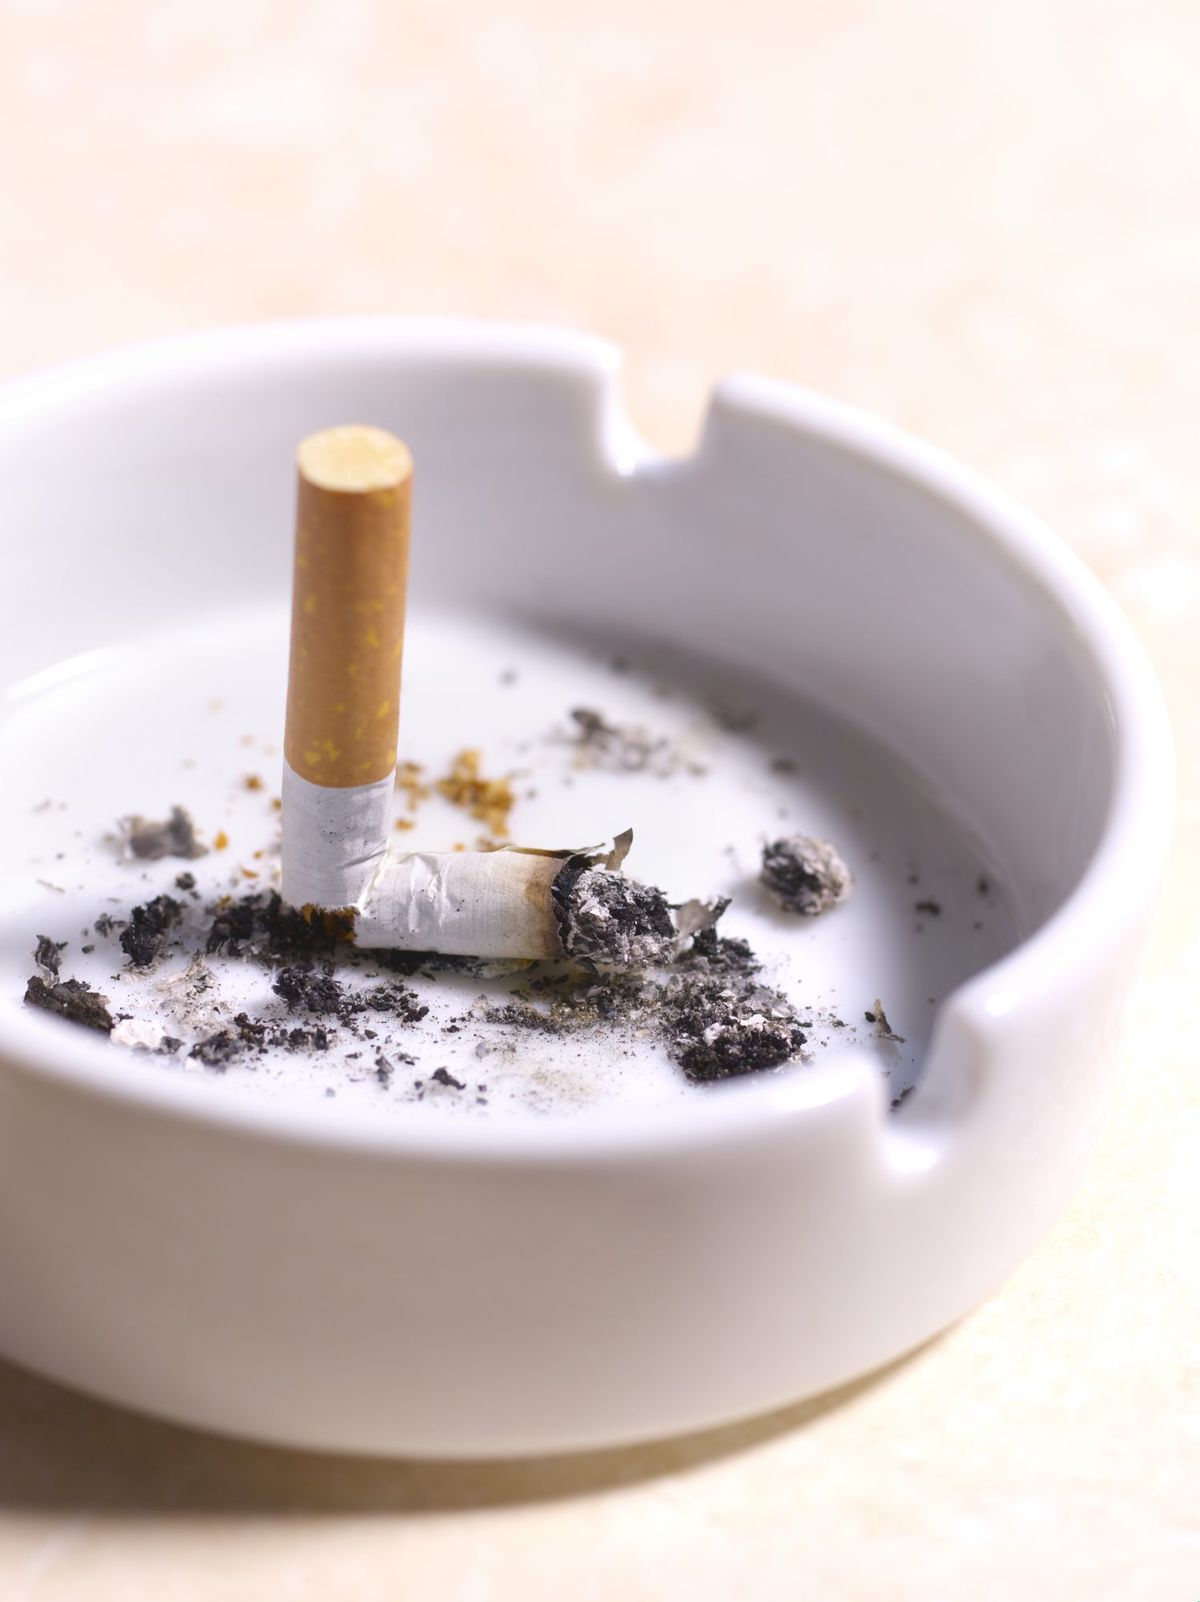 Social Smokers Face Real Risks, Too